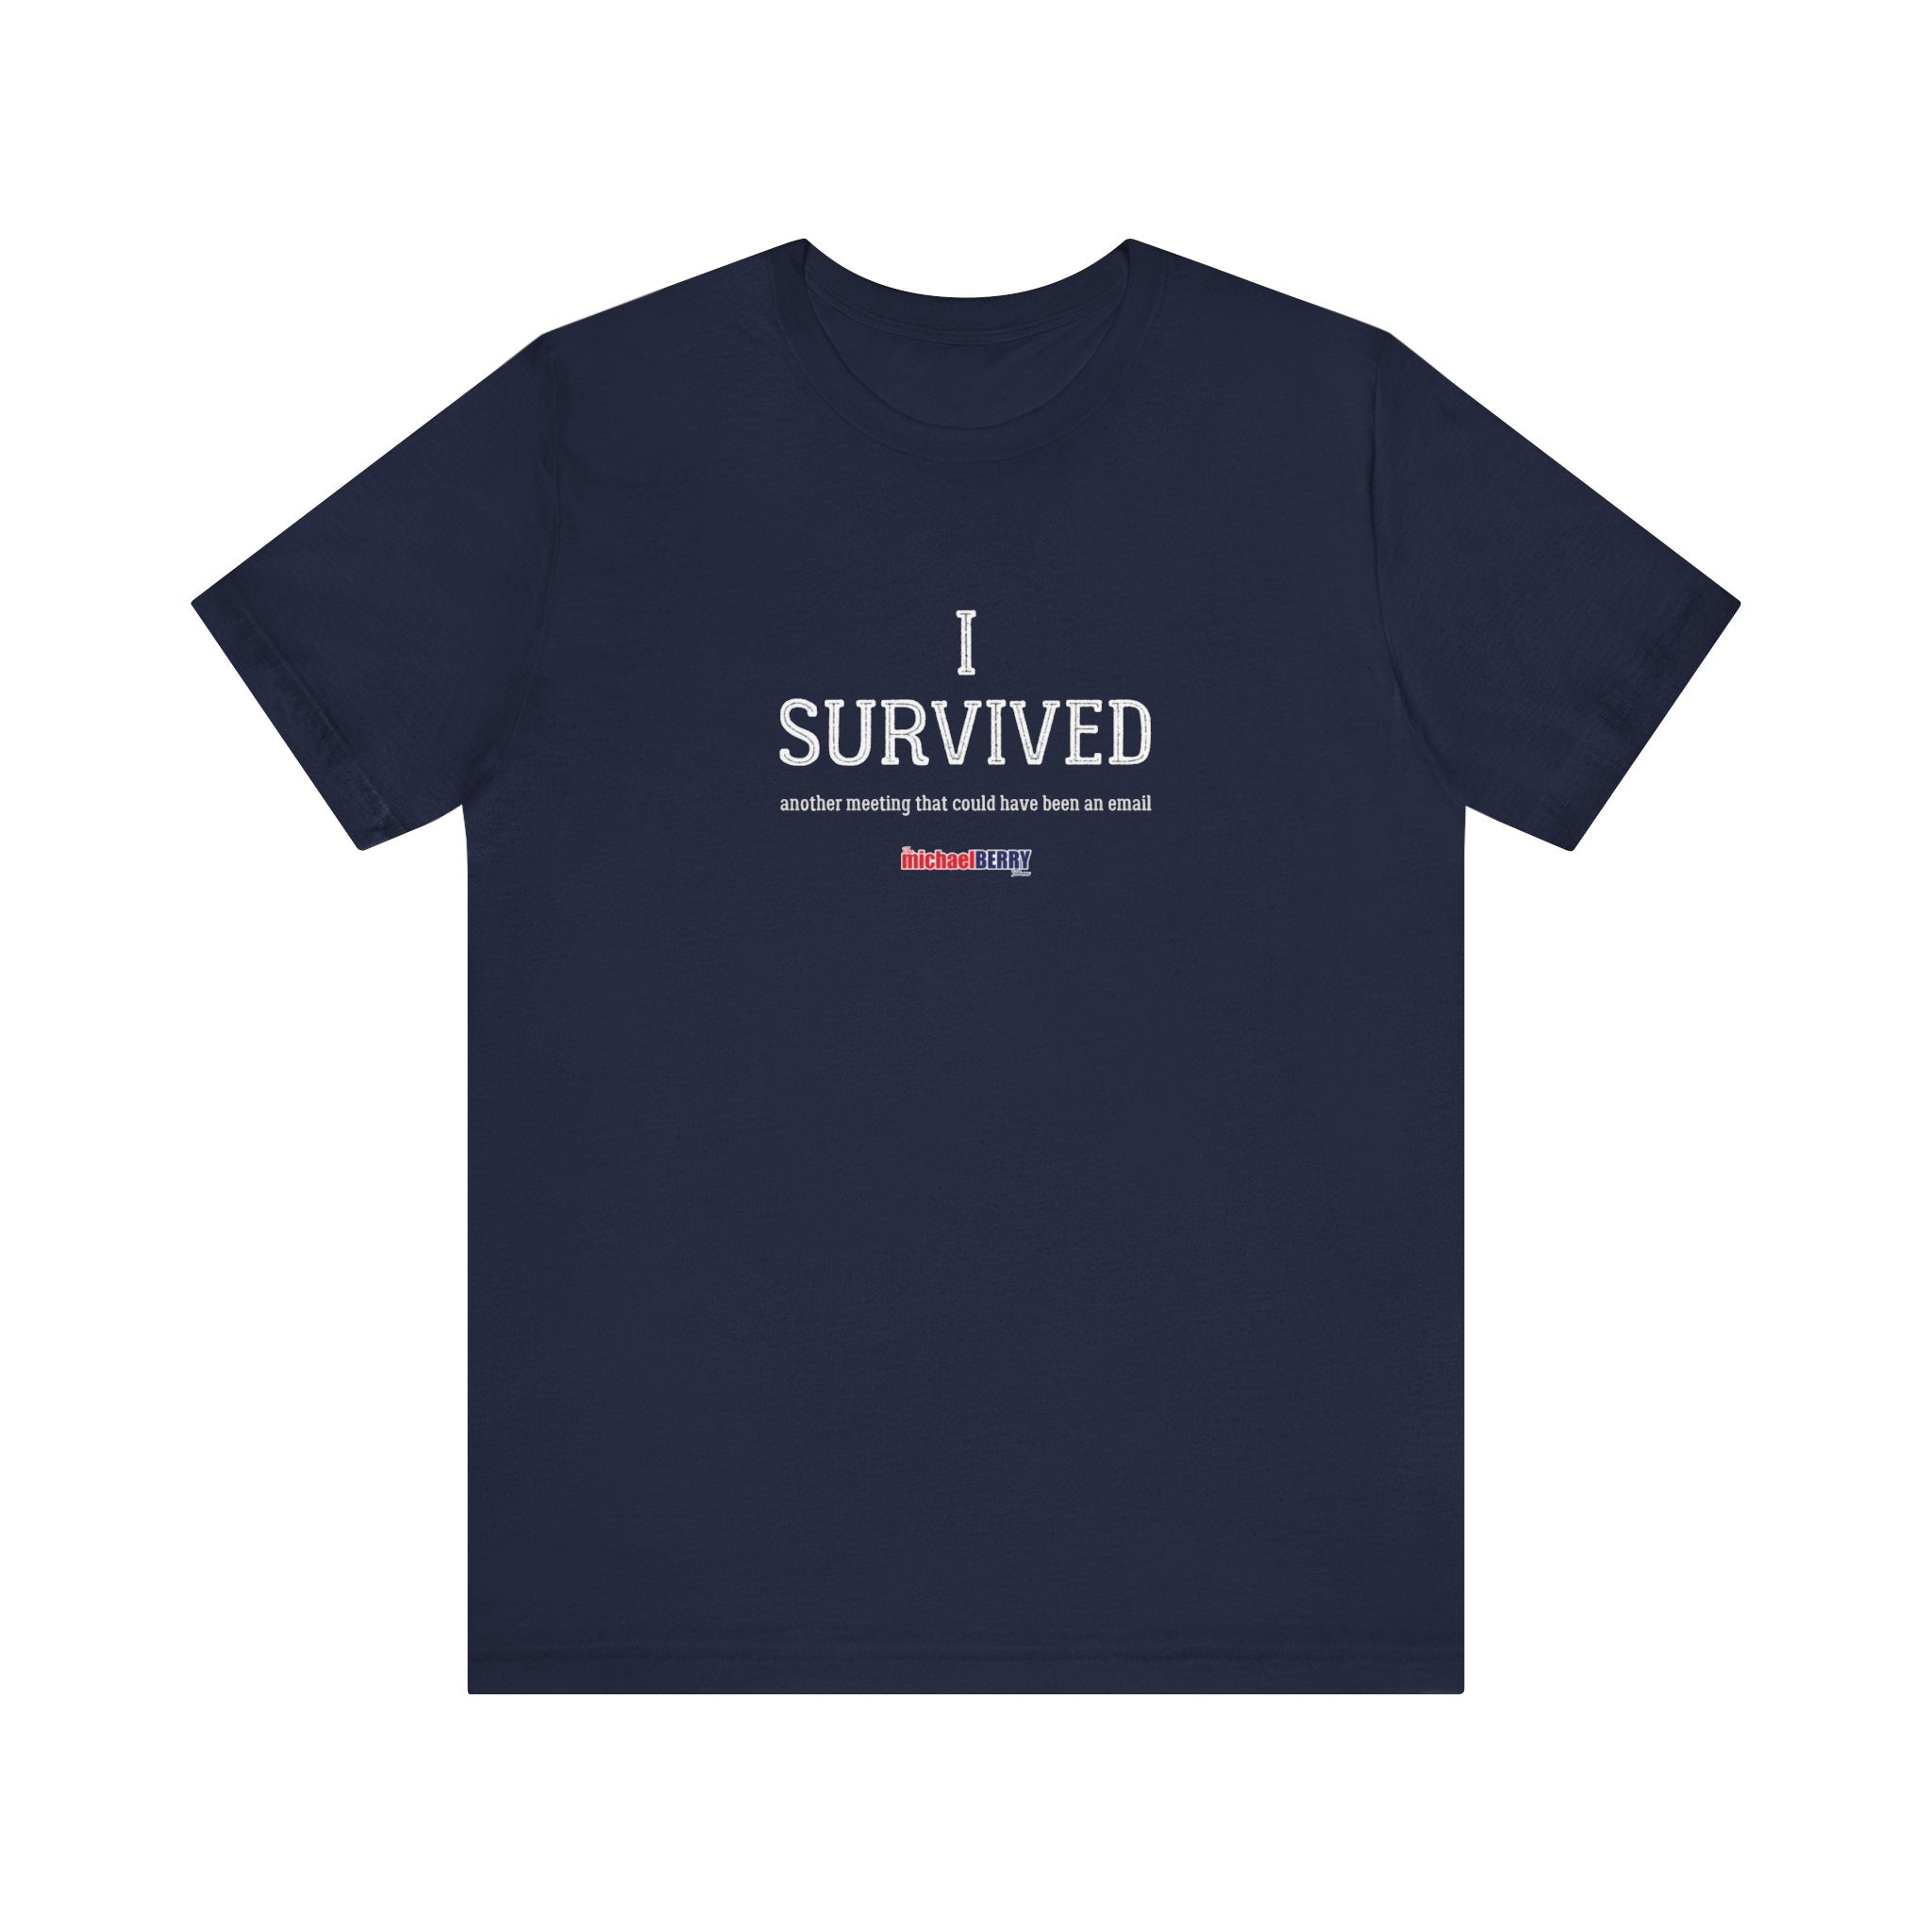 I SURVIVED another meeting that could have been an email - Men's Short Sleeve Tee